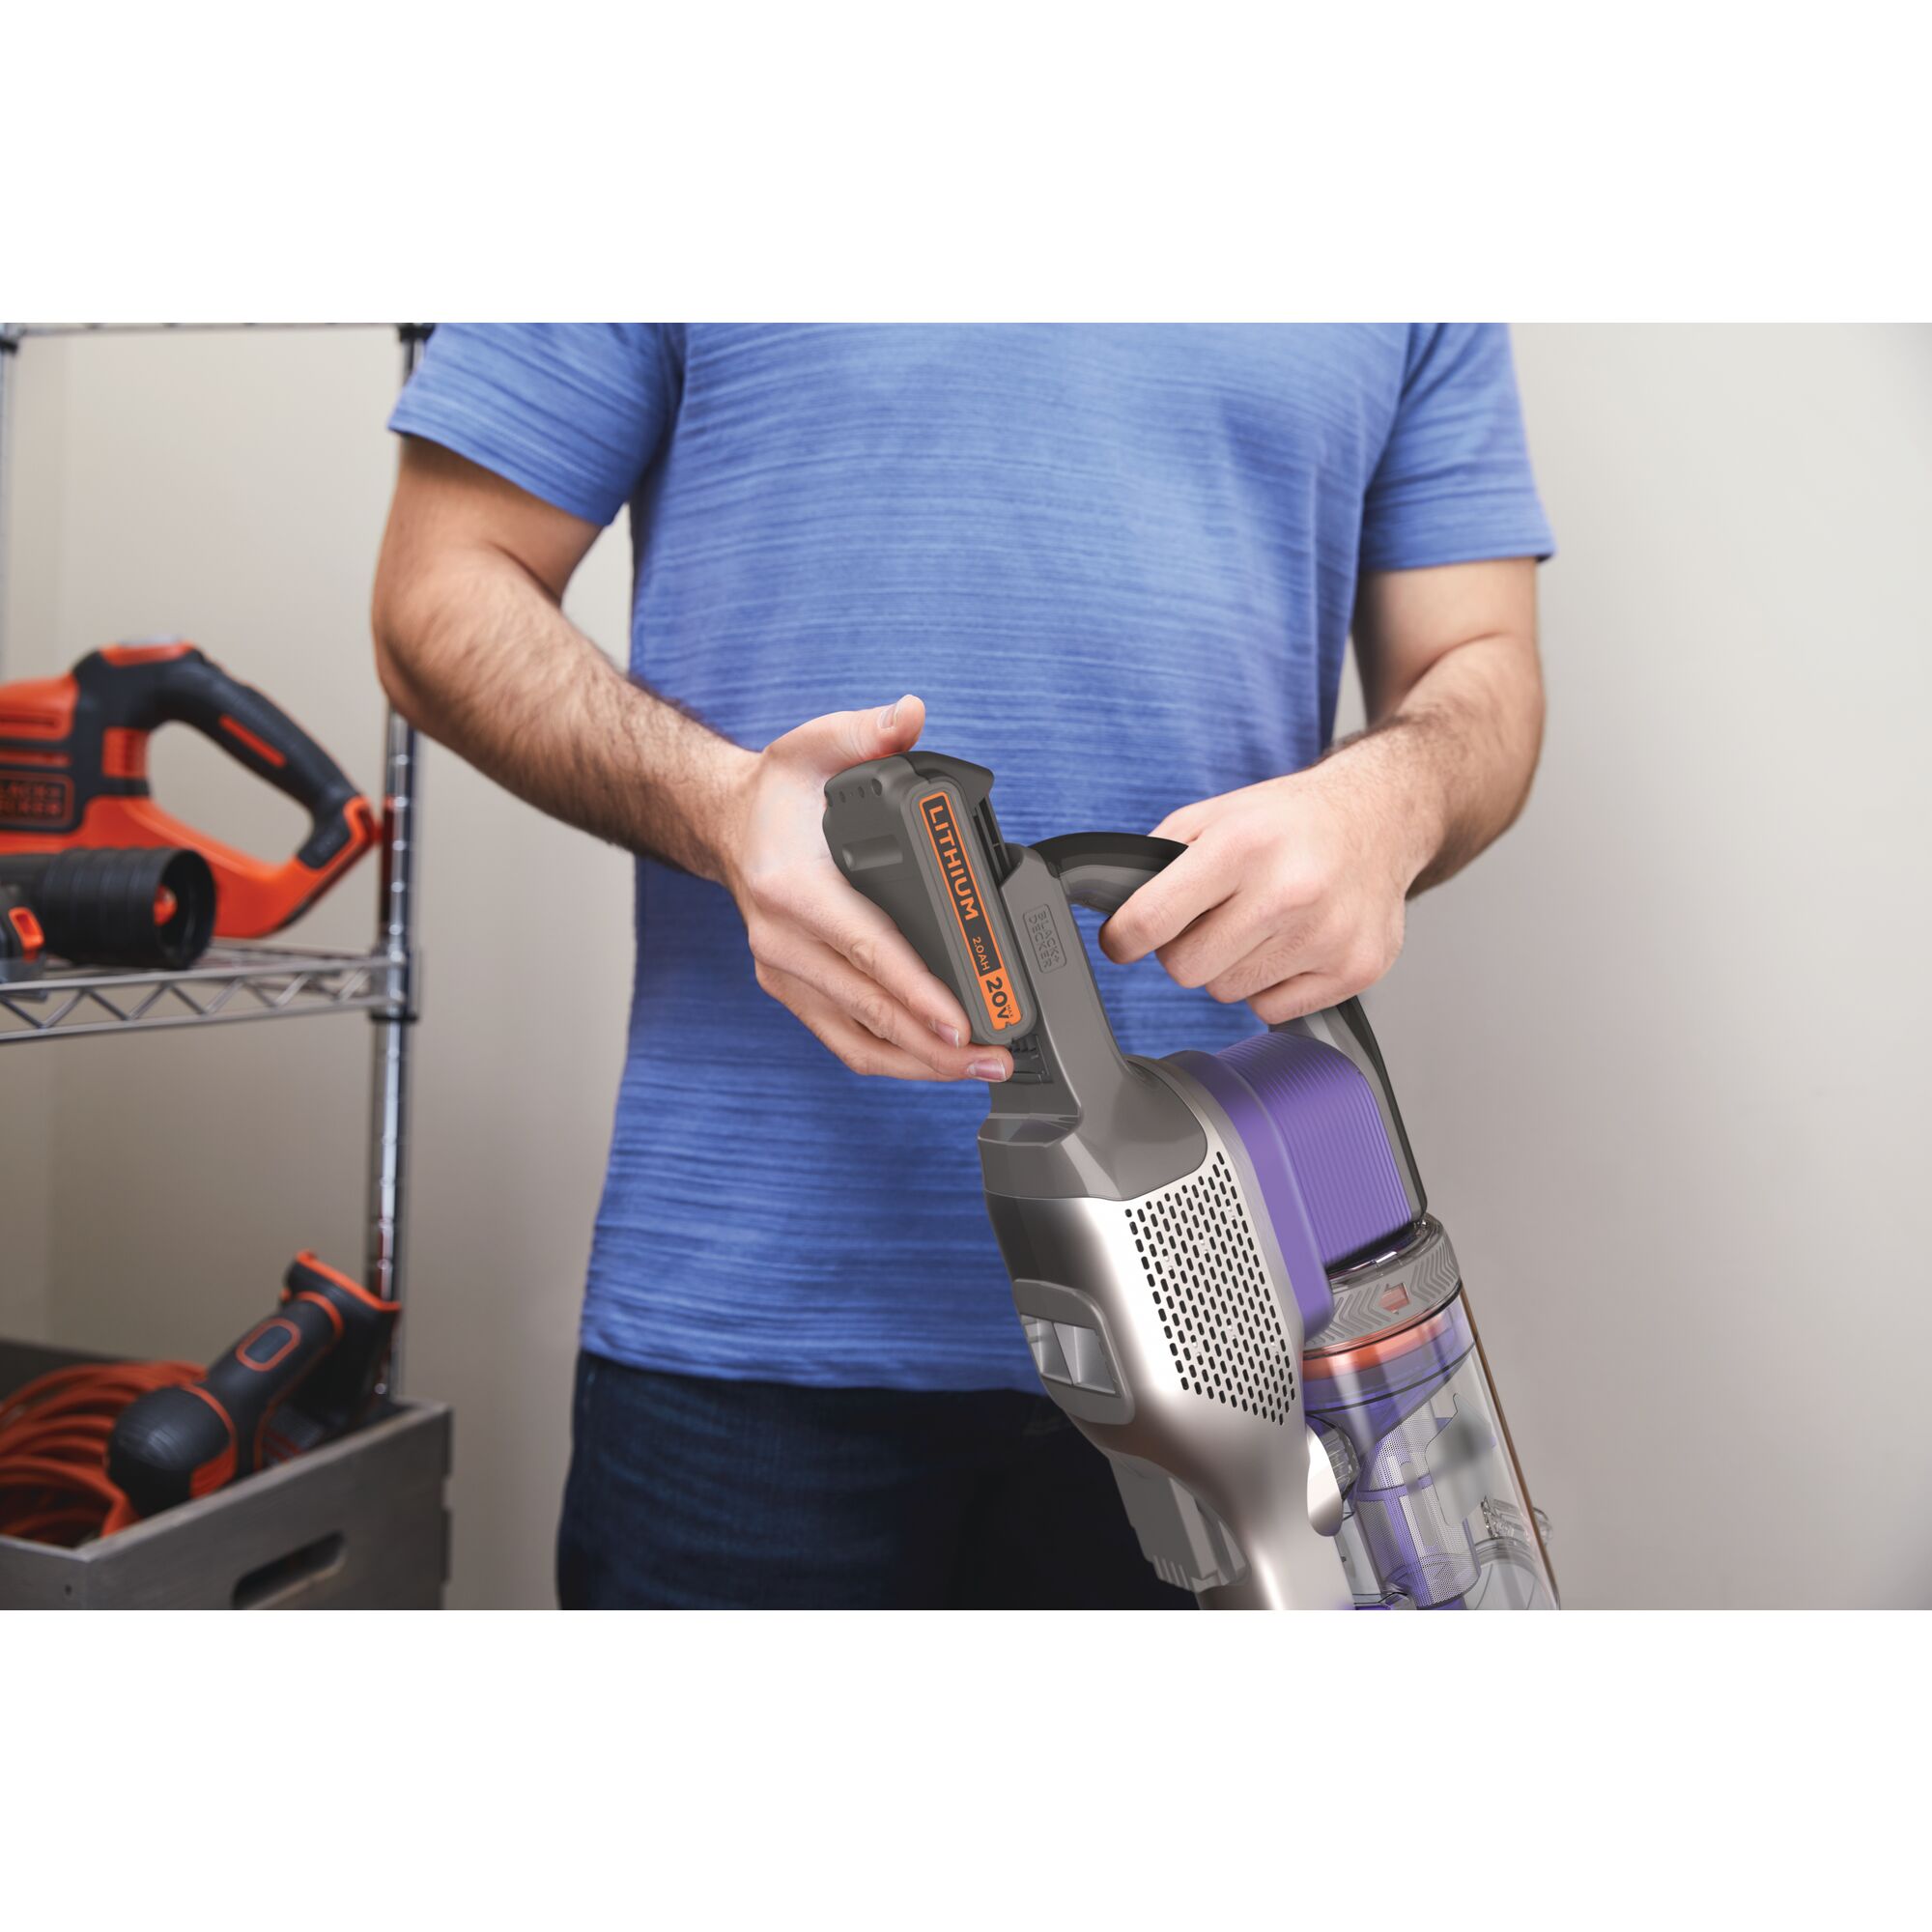 Removable battery feature of POWERSERIES Extreme pet cordless stick vacuum cleaner.